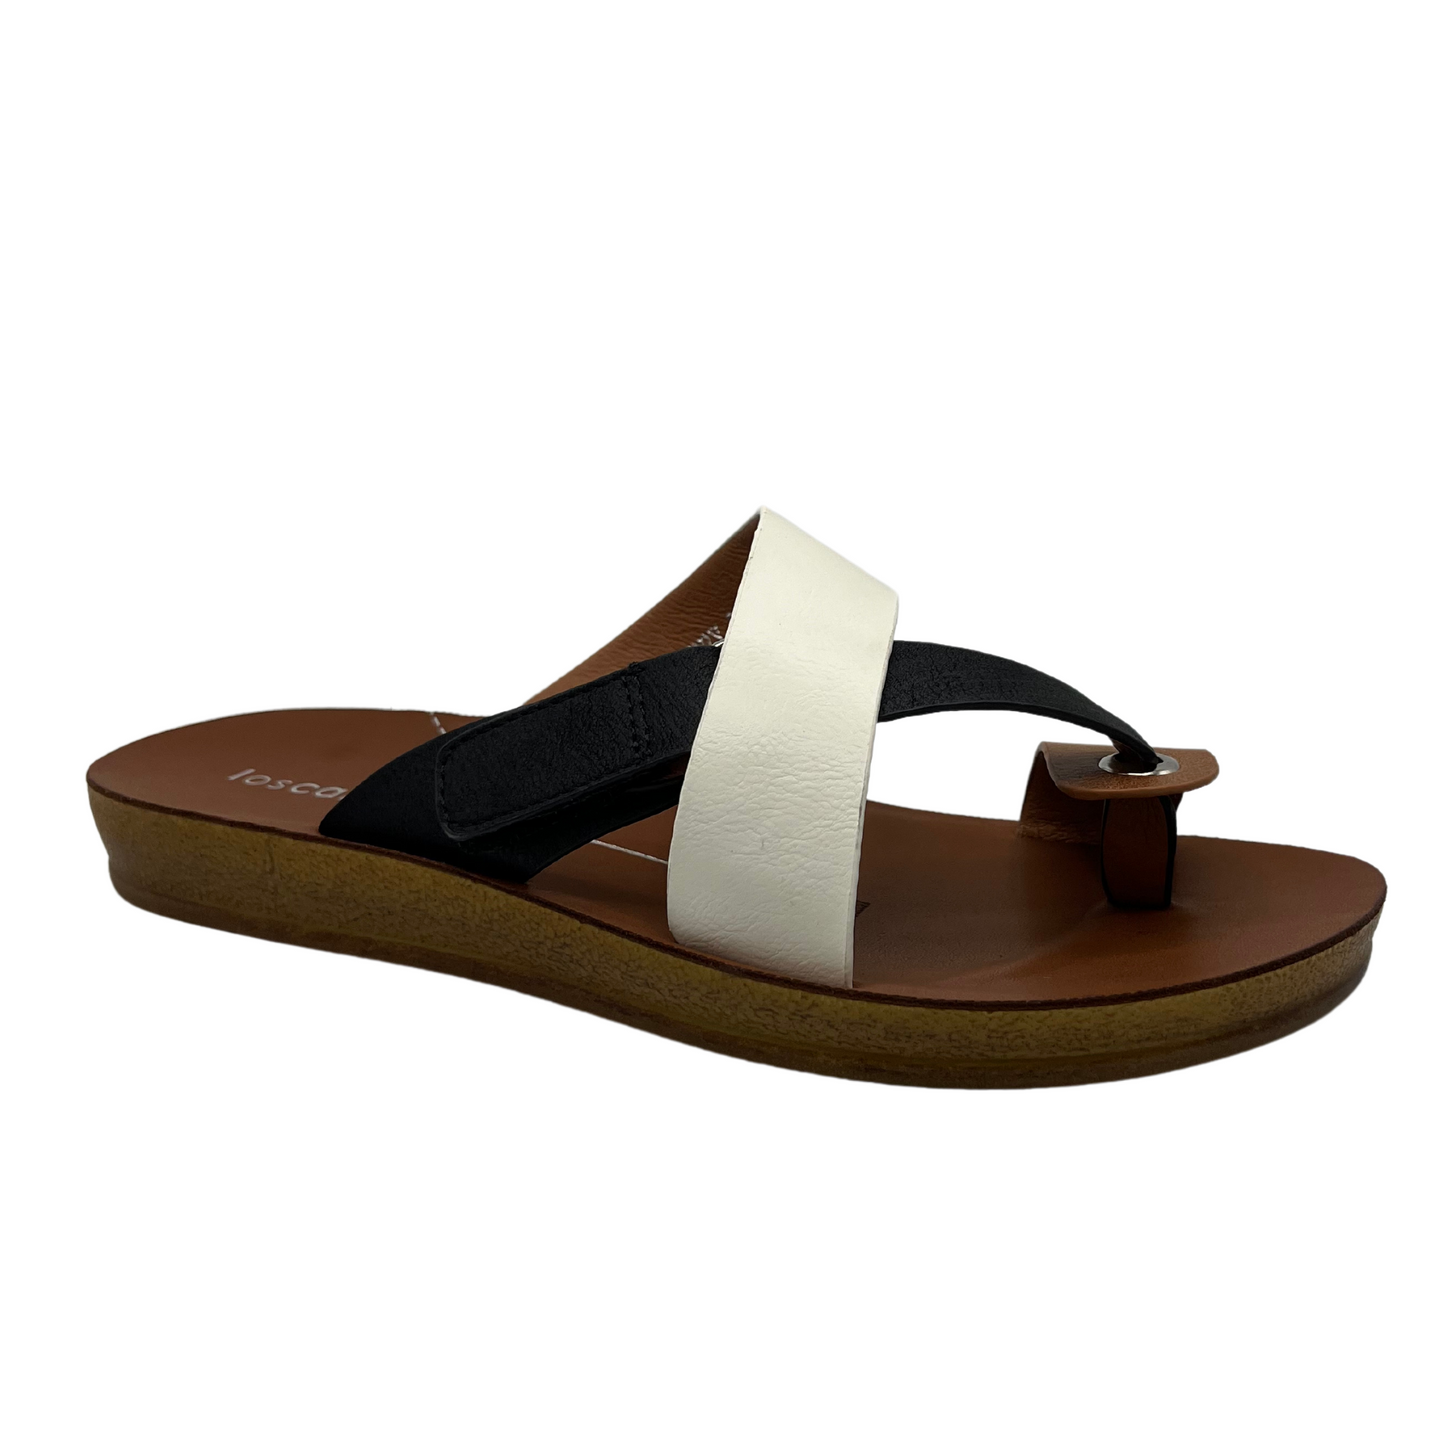 45 degree angled view of black and white strapped sandal with toe strap and velcro closure